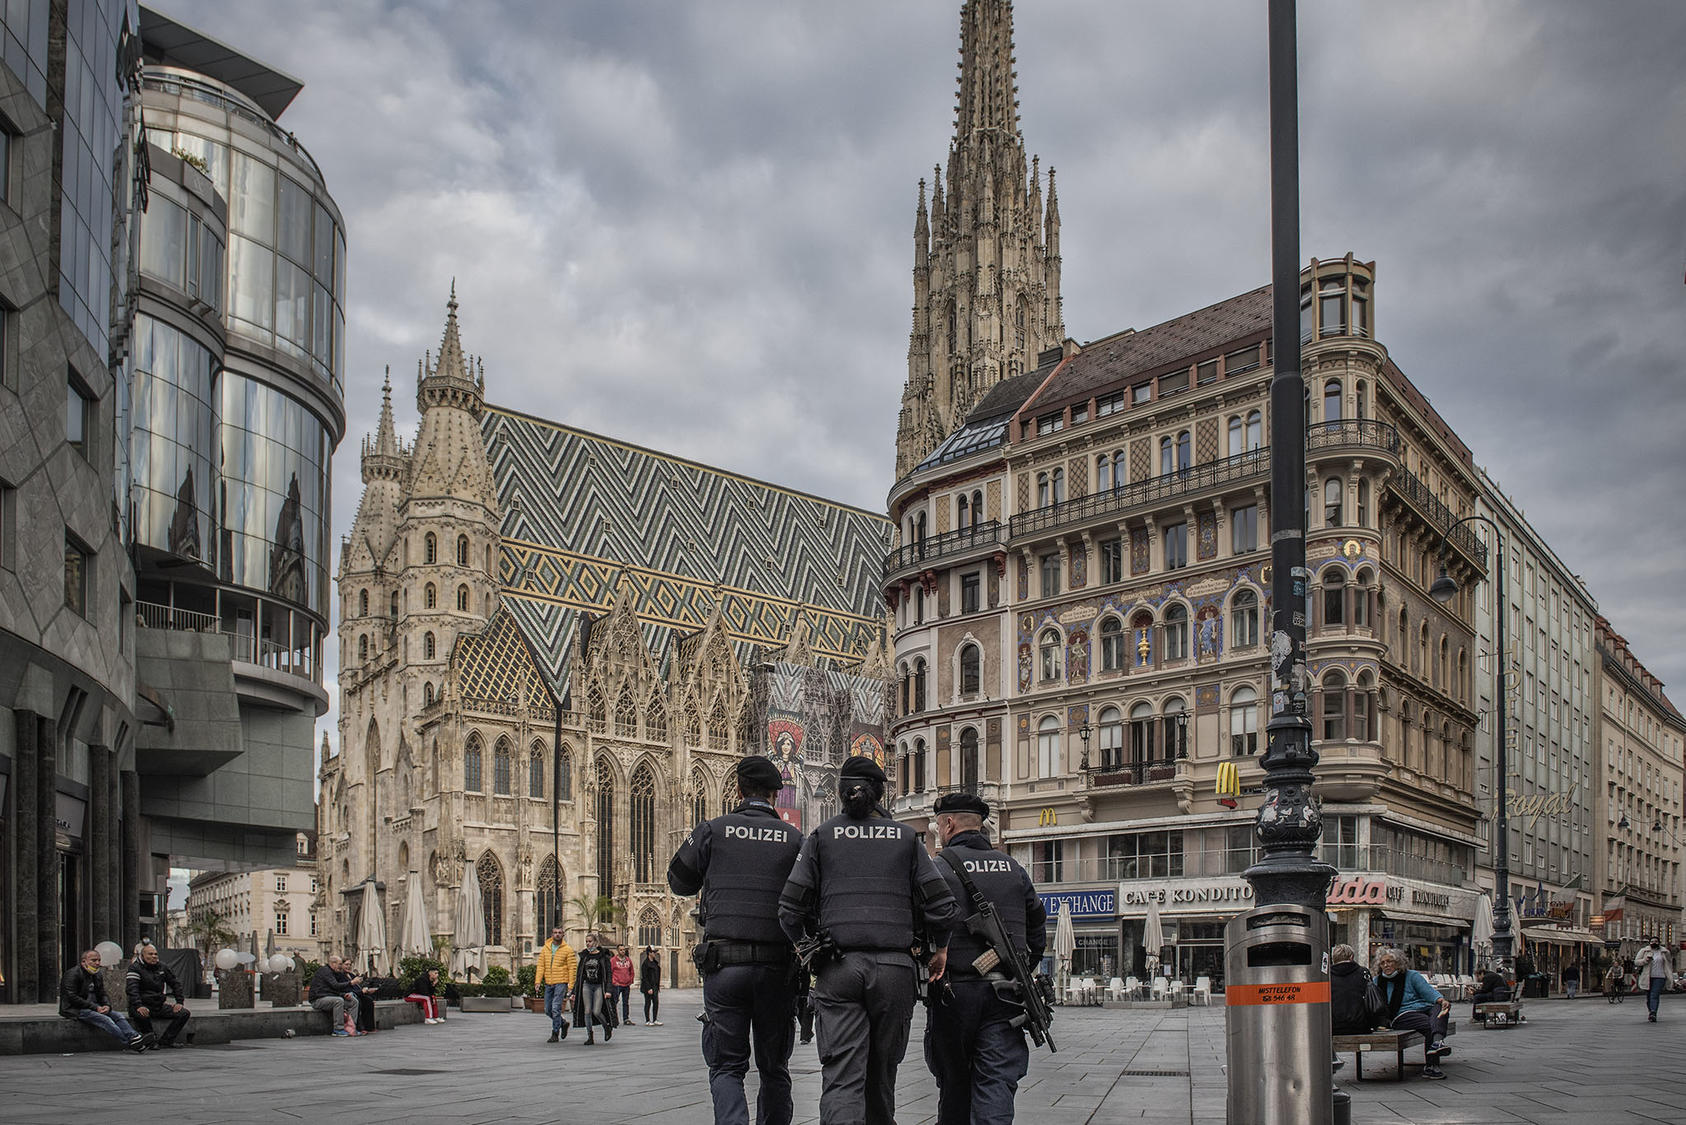 Police patrol the scene of a mass shooting in central Vienna on Tuesday, Nov. 3, 2020. The attacker, who was killed by police, was a 20-year-old Austrian citizen who had once been imprisoned for attempting to travel to Syria to join the Islamic State. (Laetitia Vancon/The New York Times)